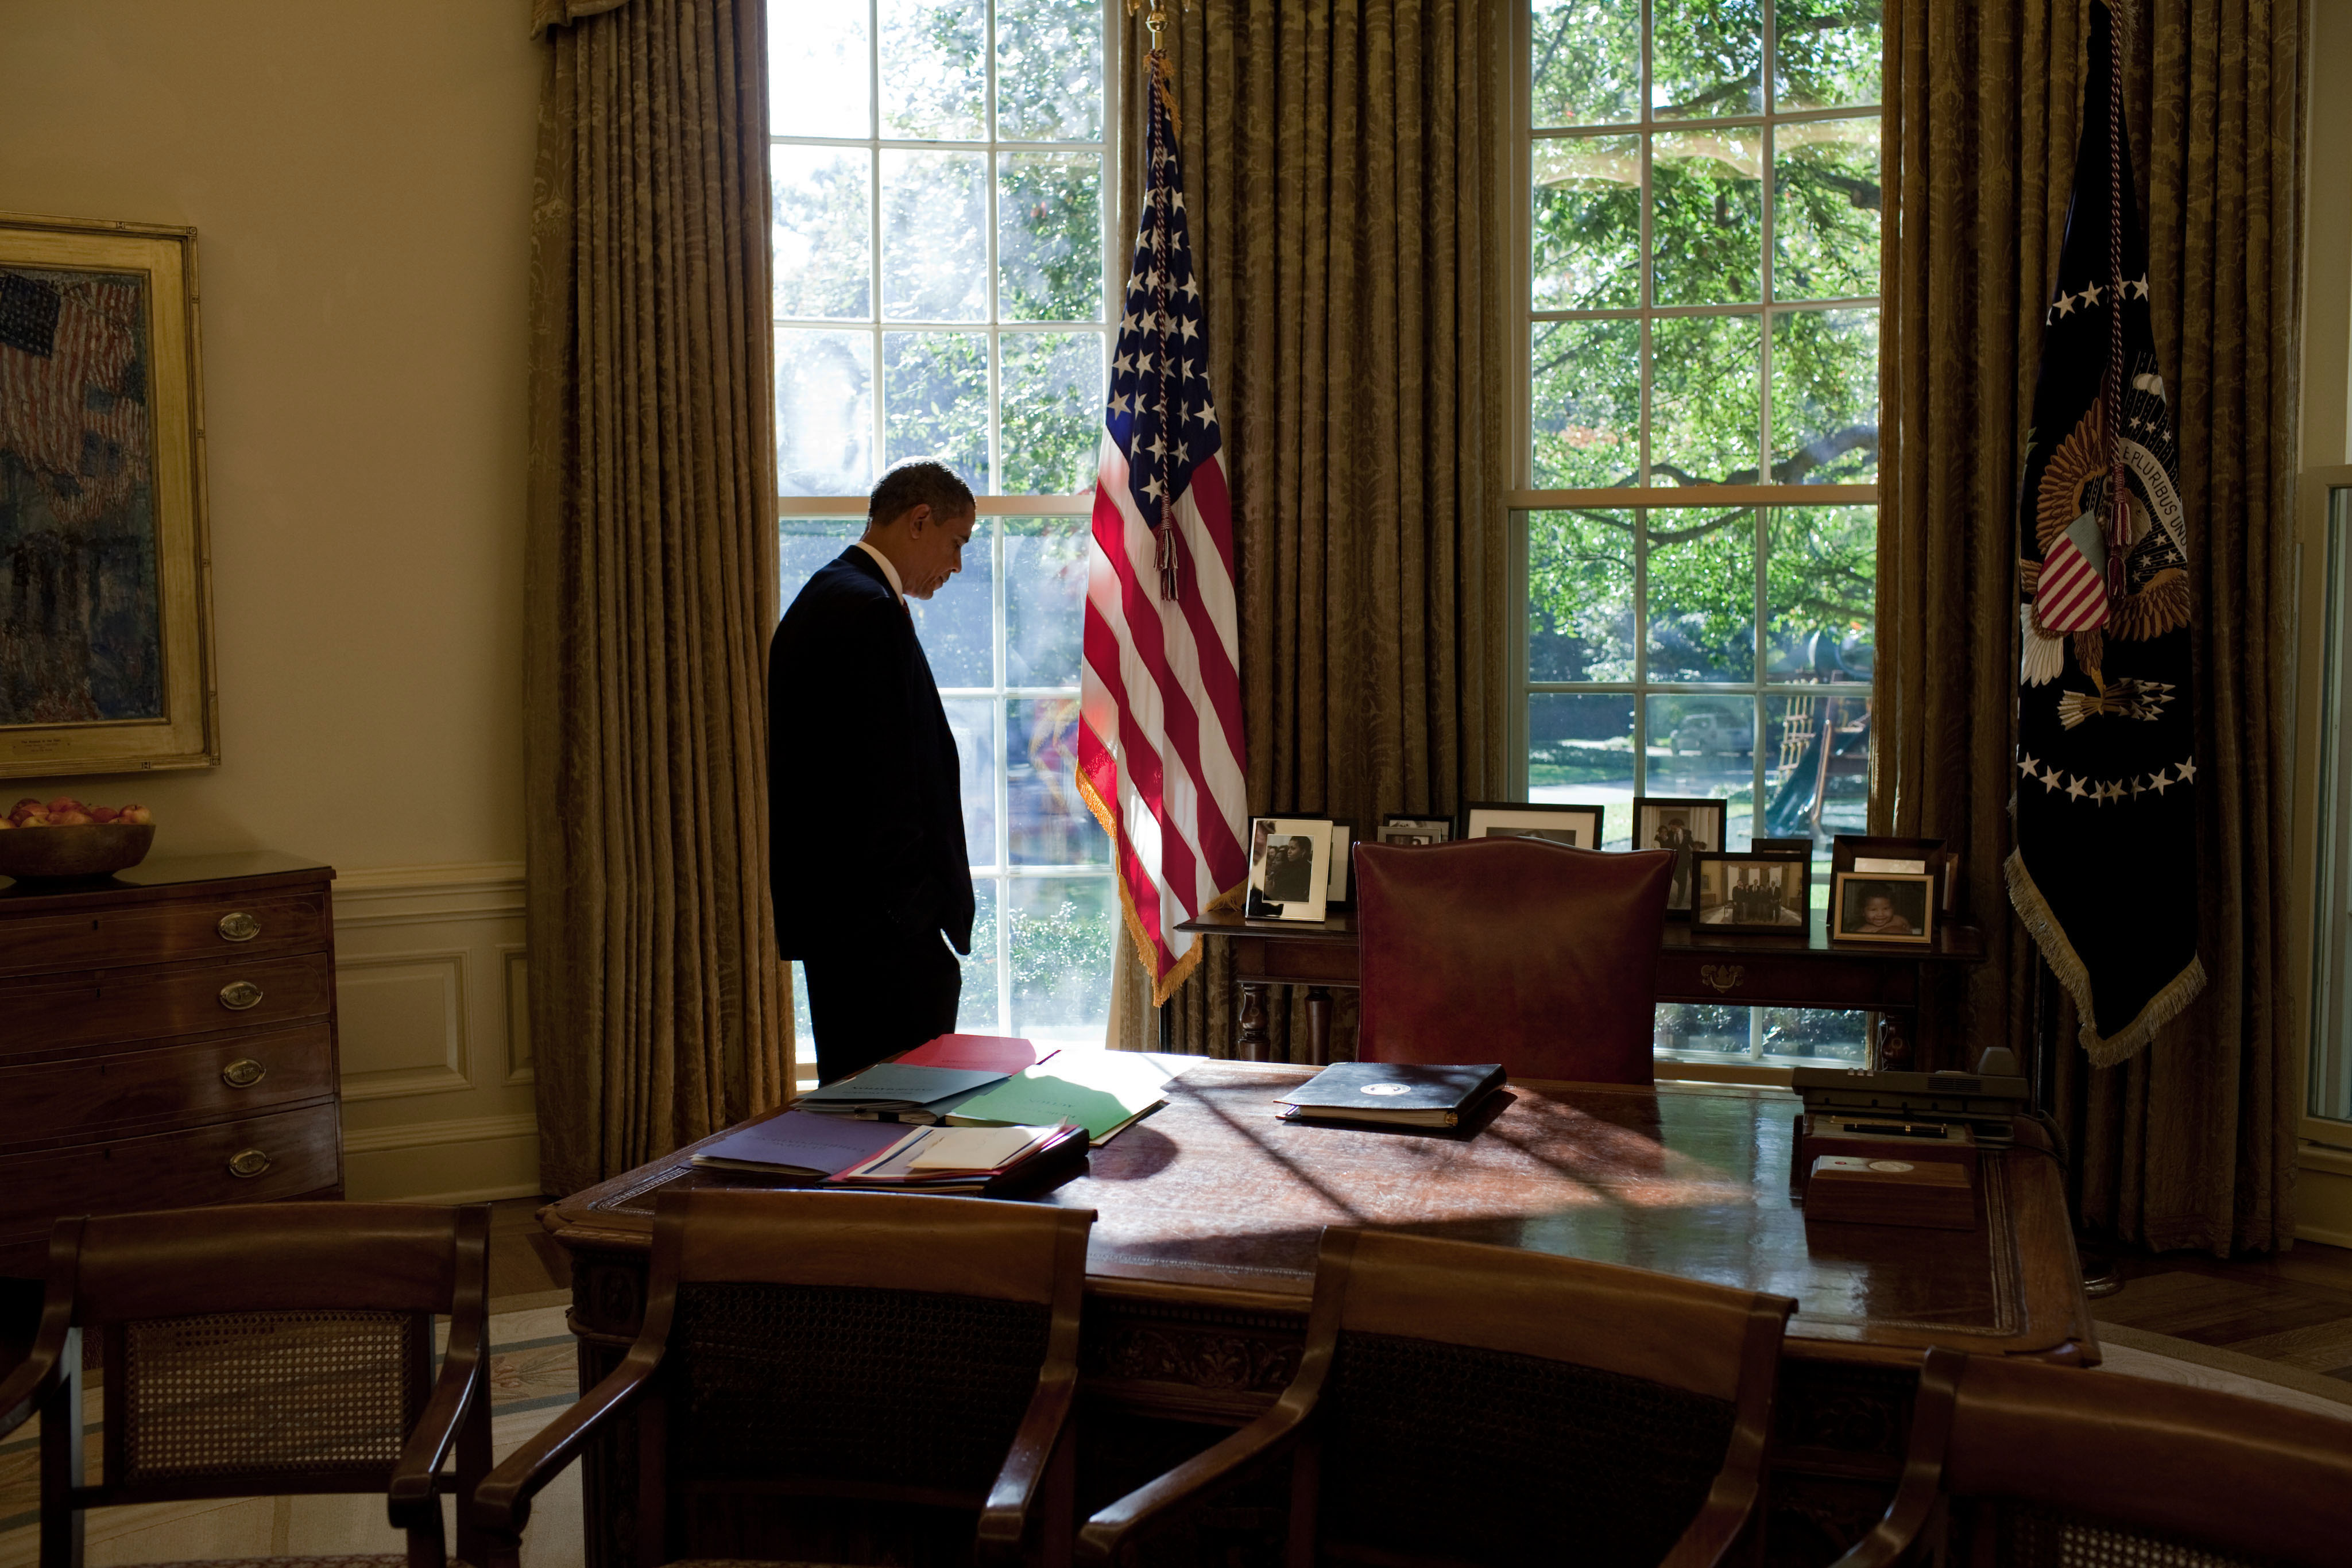 File:Barack Obama in the Oval Office 2009-10.jpg - Wikimedia Commons